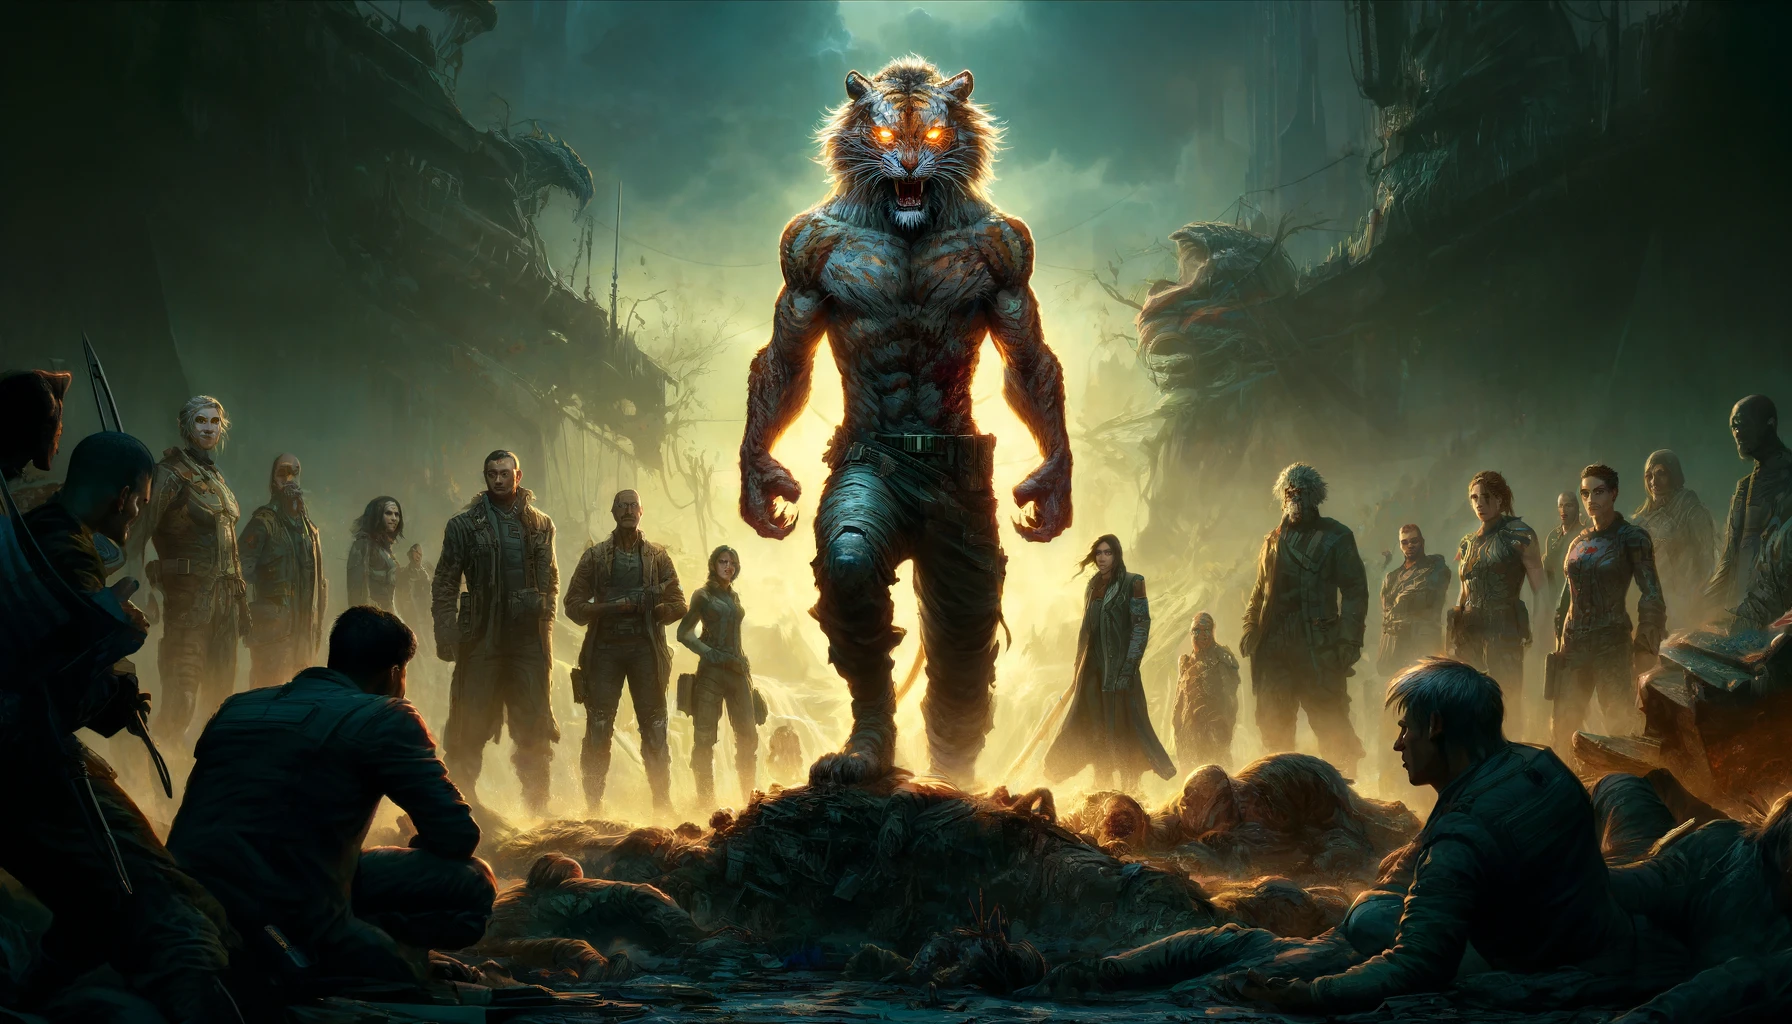 A huge werewolf tiger is coming towards you against the backdrop of the sun's glow, surrounded by many fighters.